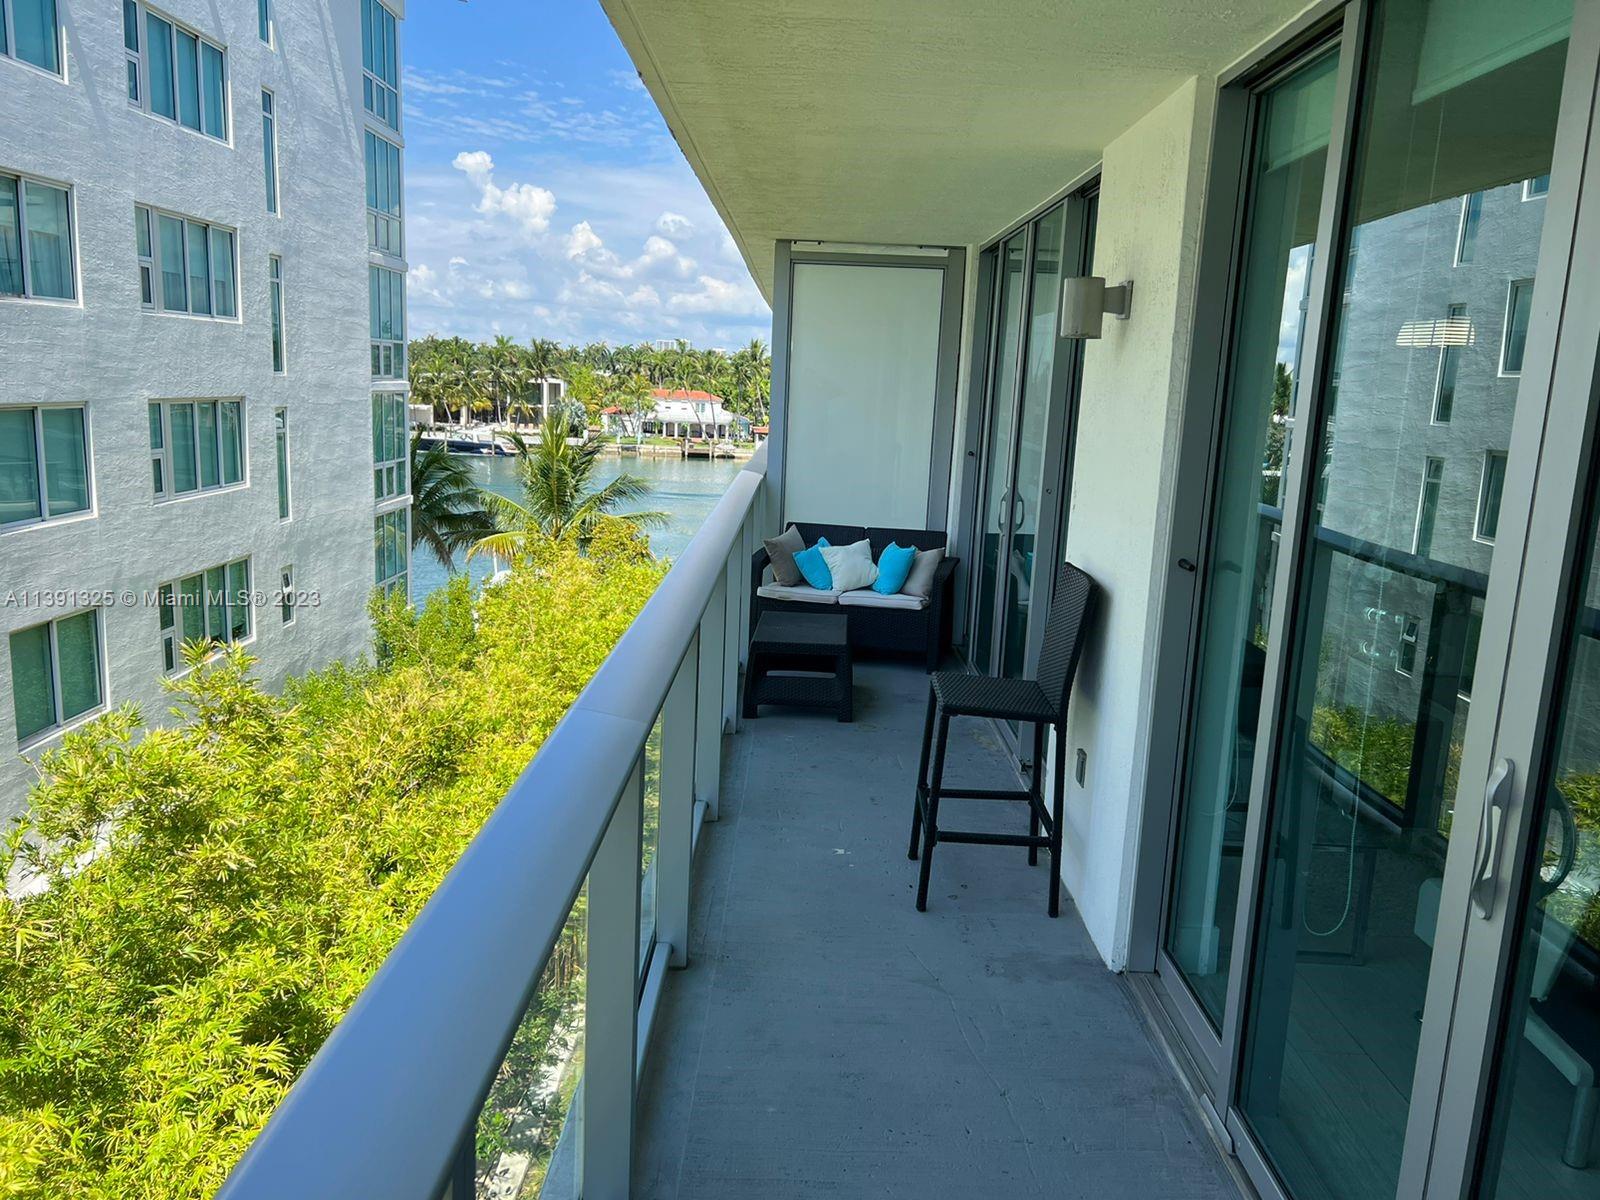 Great for investors or a second home, min 30 day rentals are allowed. This spectacular 1 bed- Open floor plan, loft style features a bedroom open into the living room, closet, in-suite bathroom and balcony, with partial bay views. Great location, just steps from the beach, parks, local stores and restaurants. Peloro amenities include: infinity pool, exercise room, spa and concierge. All parking is via valet.